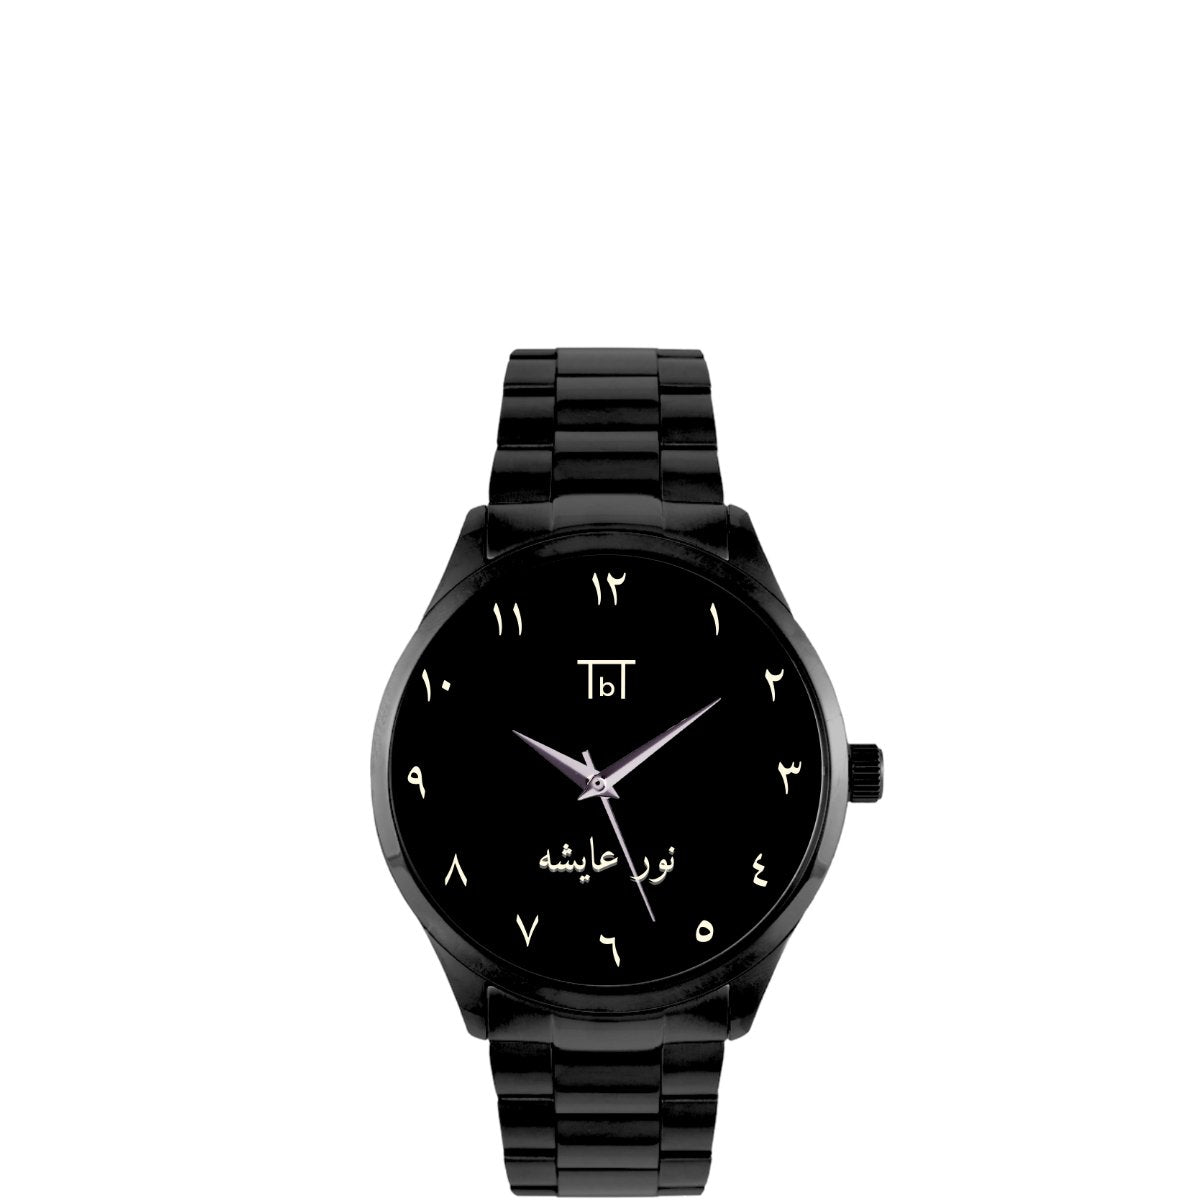 Arabic Dial Watch in Black Stainless Steel FOR HER - TbT WatchesTbT Watches